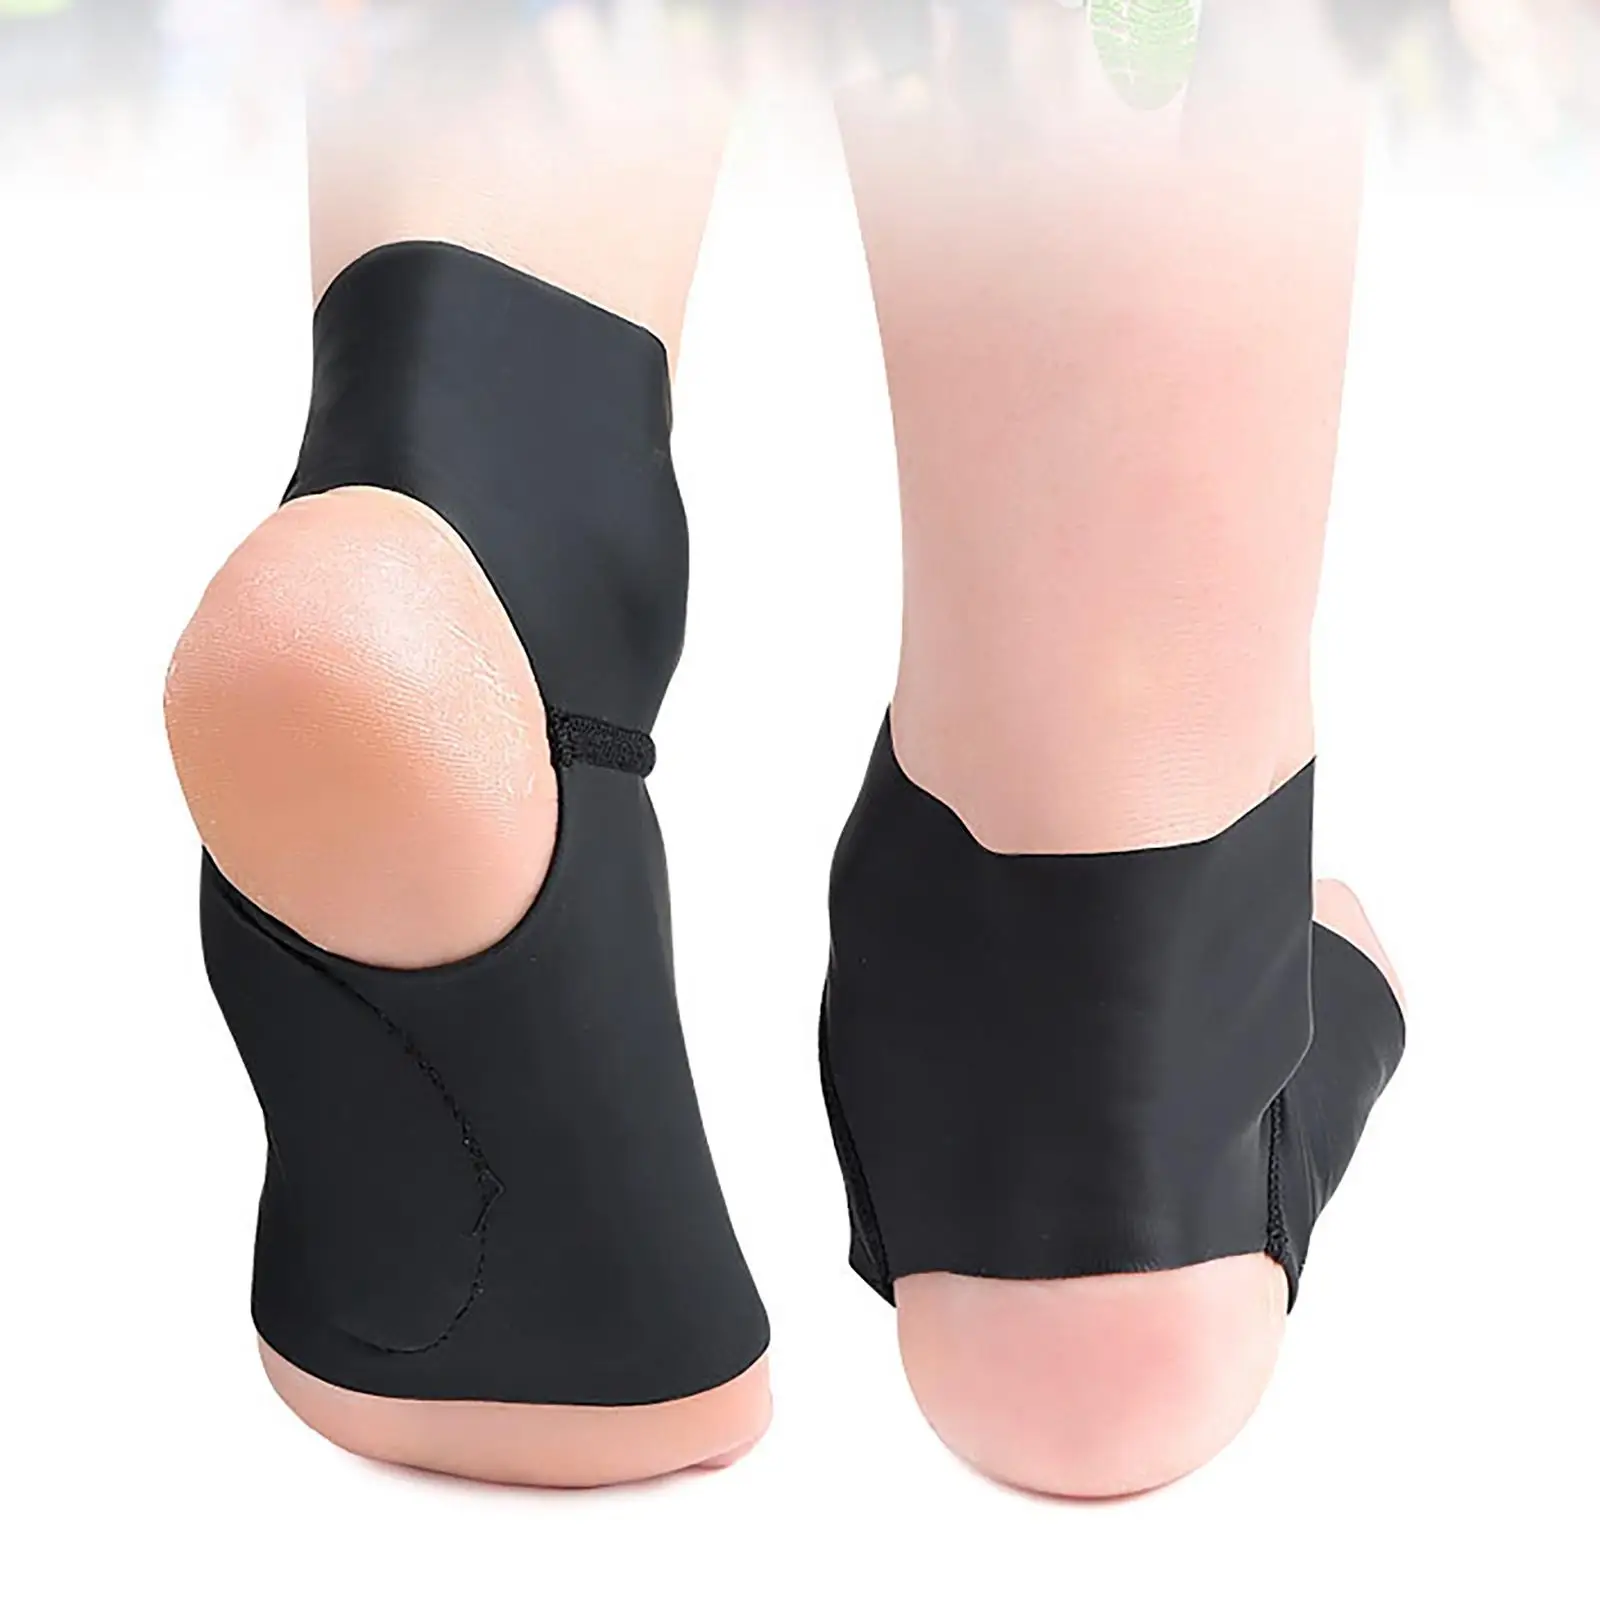 2x Arch Support Foot Pad Breathable Durable Professional Washable Orthopedic  Ankle Compression  Sports ,Flat Feet, Men Women